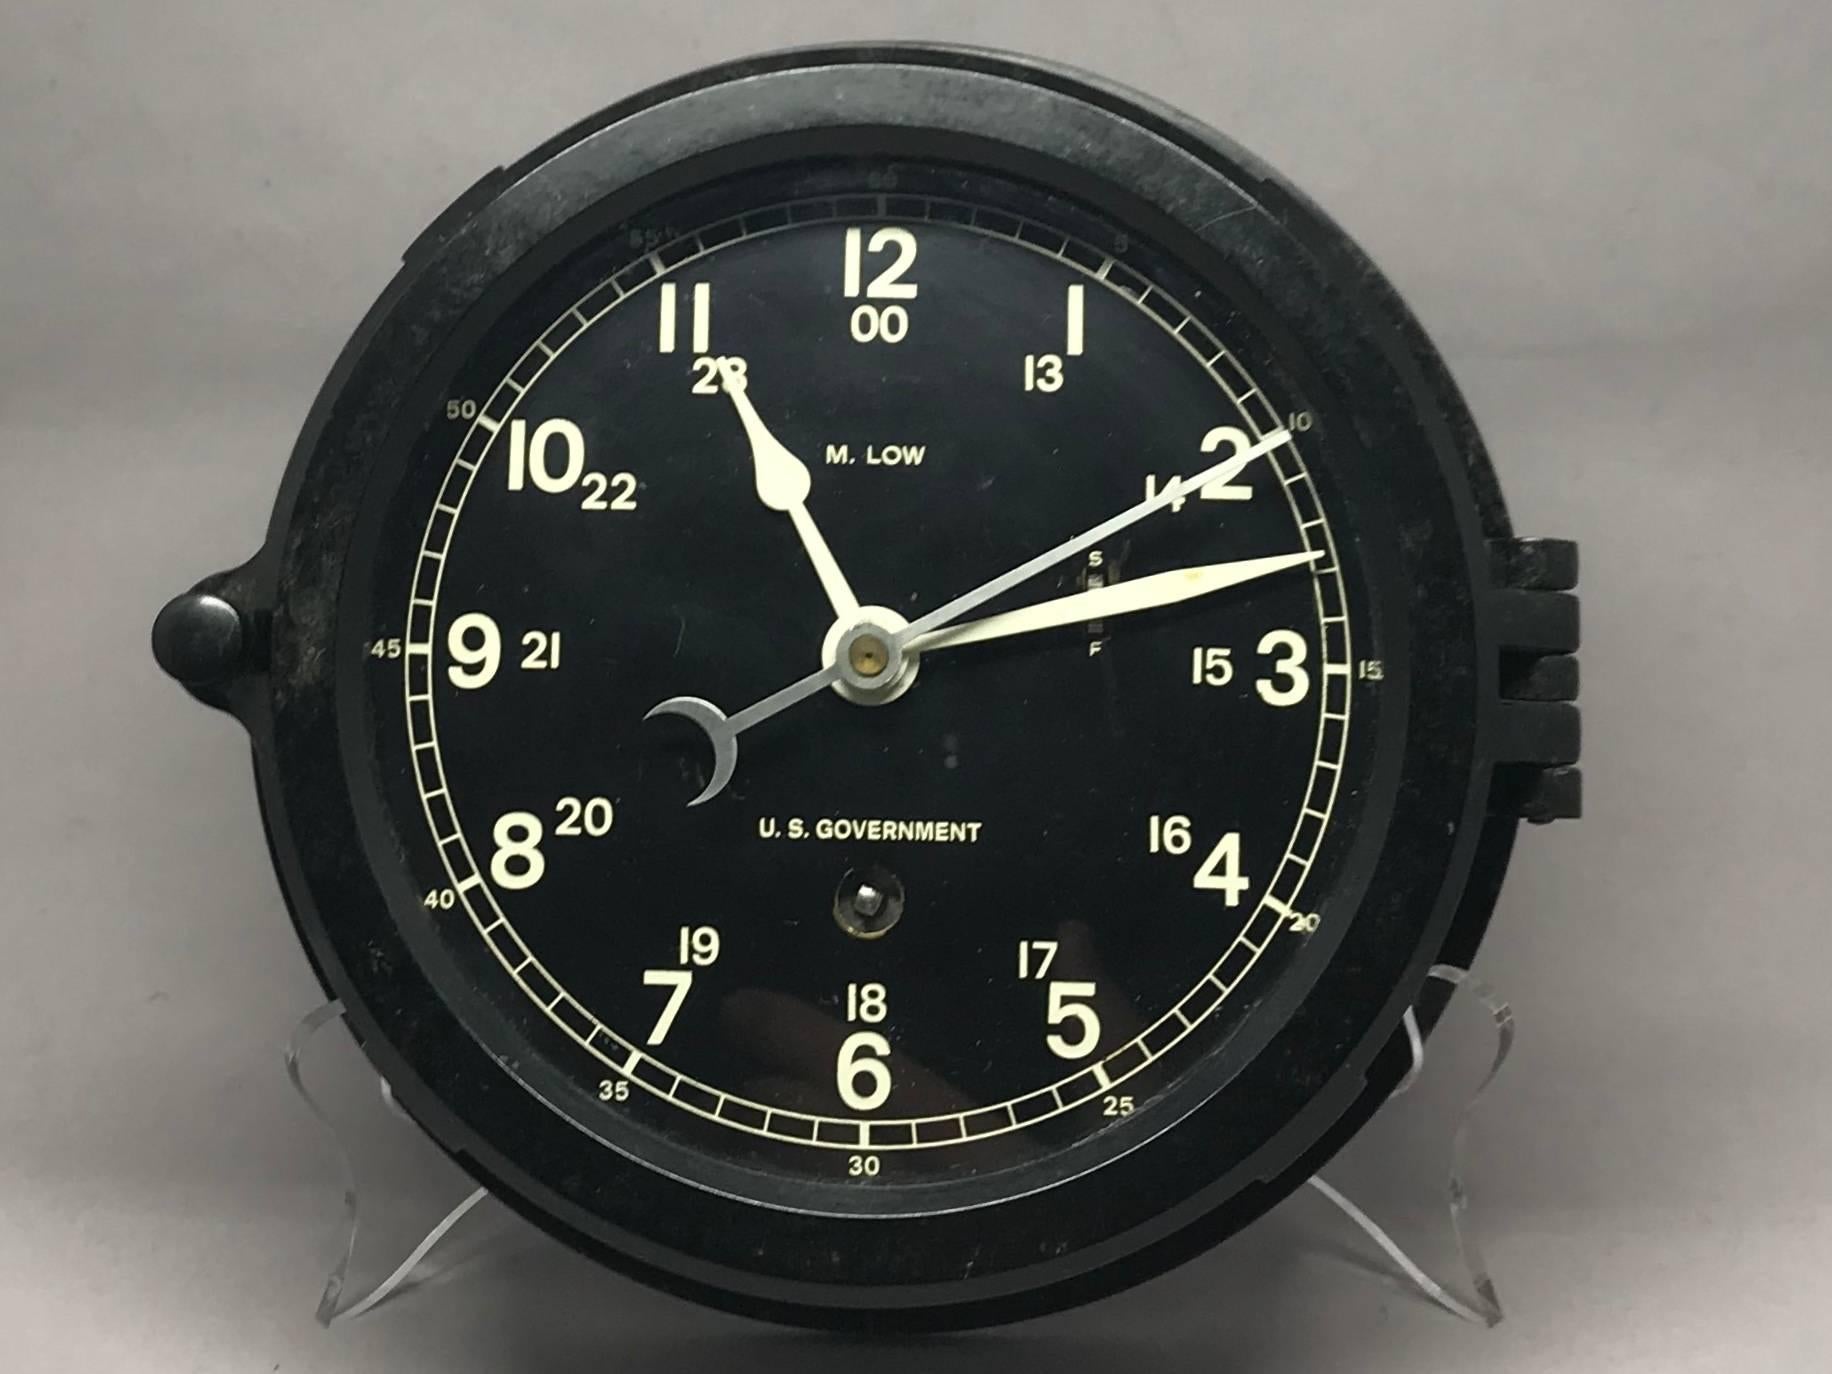 Vintage American Nautical clock. Handsome black-faced circular Chelsea naval clock with white enumeration and water-tight glass cover retailed by M. Low of New York with key, United States, 20th century.
Dimensions: 7.5